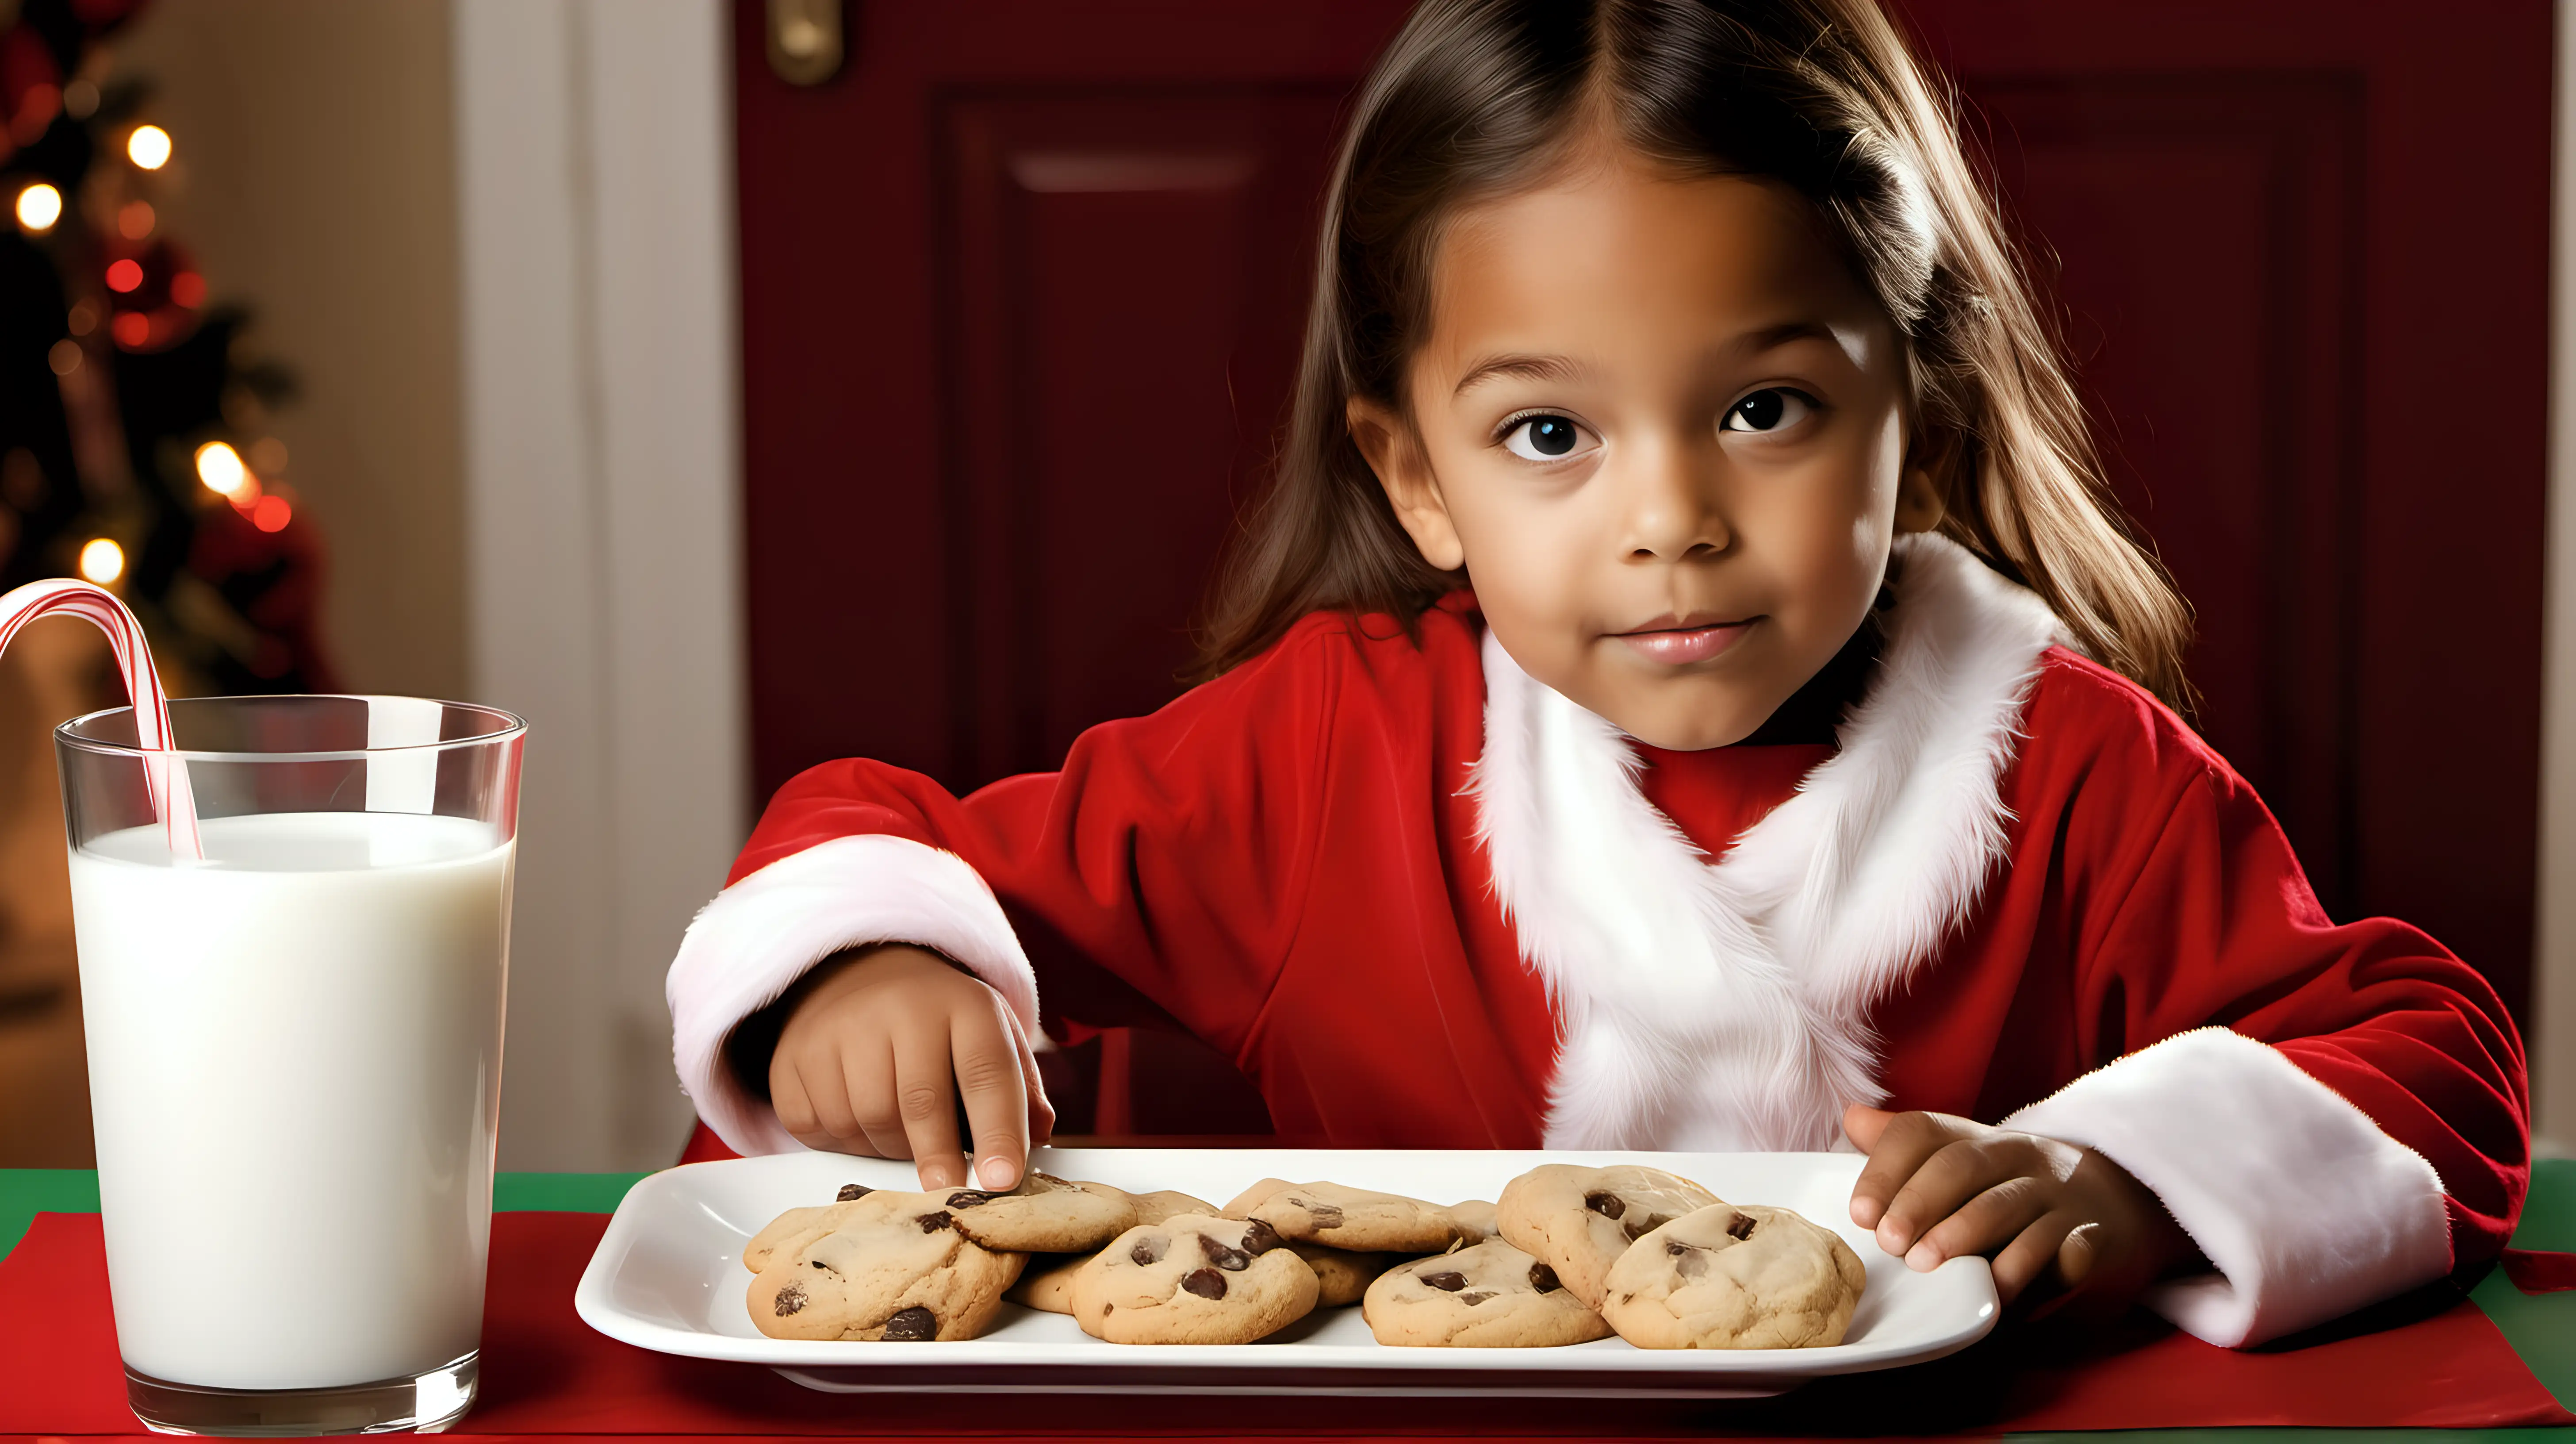 "Capture the anticipation of Christmas Eve with a child leaving out cookies and milk for Santa Claus."